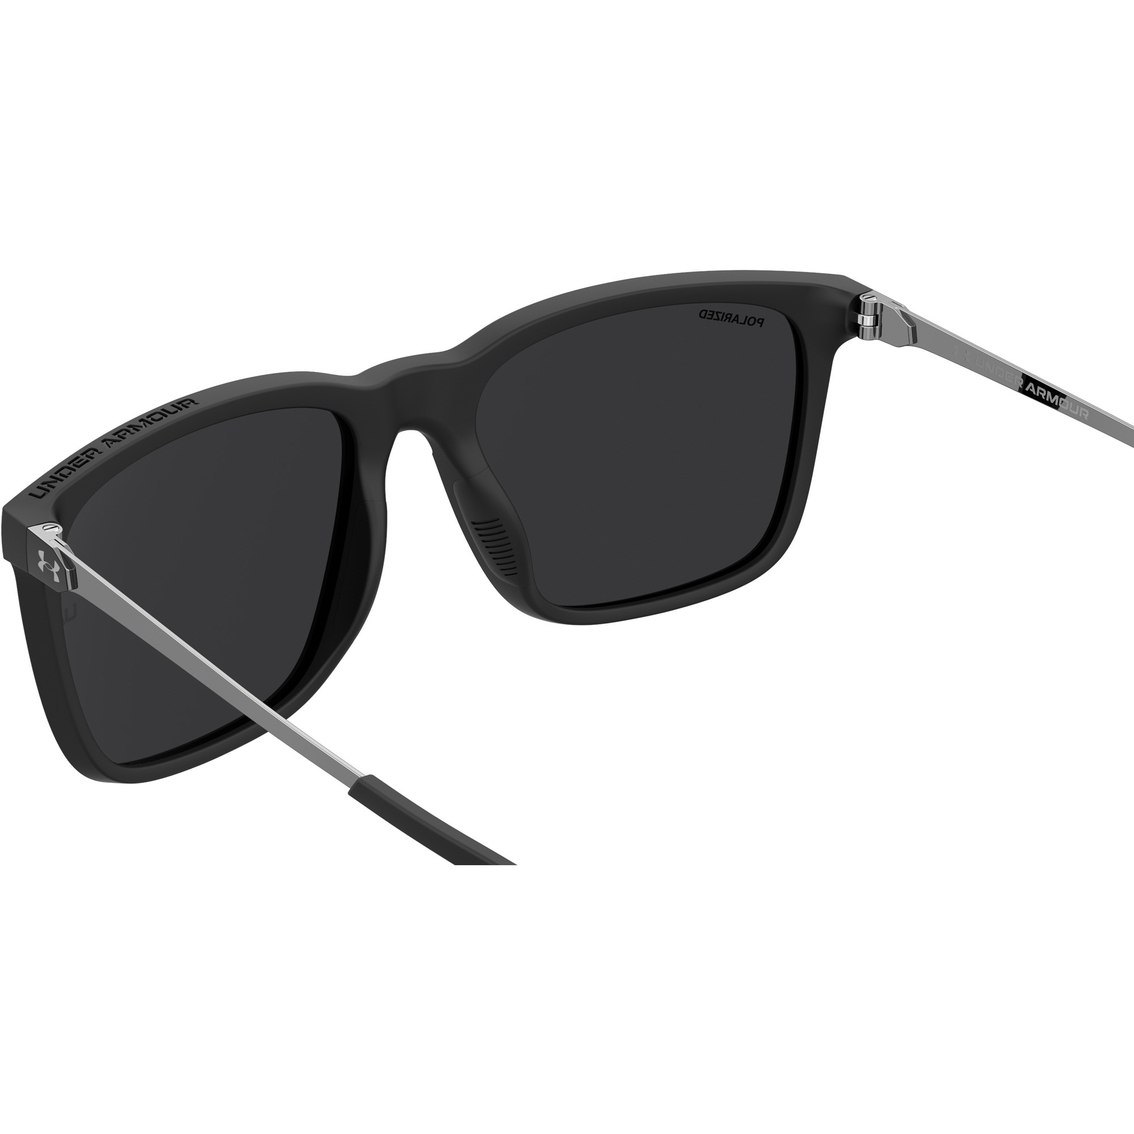 Under Armour Reliance Sunglasses 0003M9 - Image 4 of 5